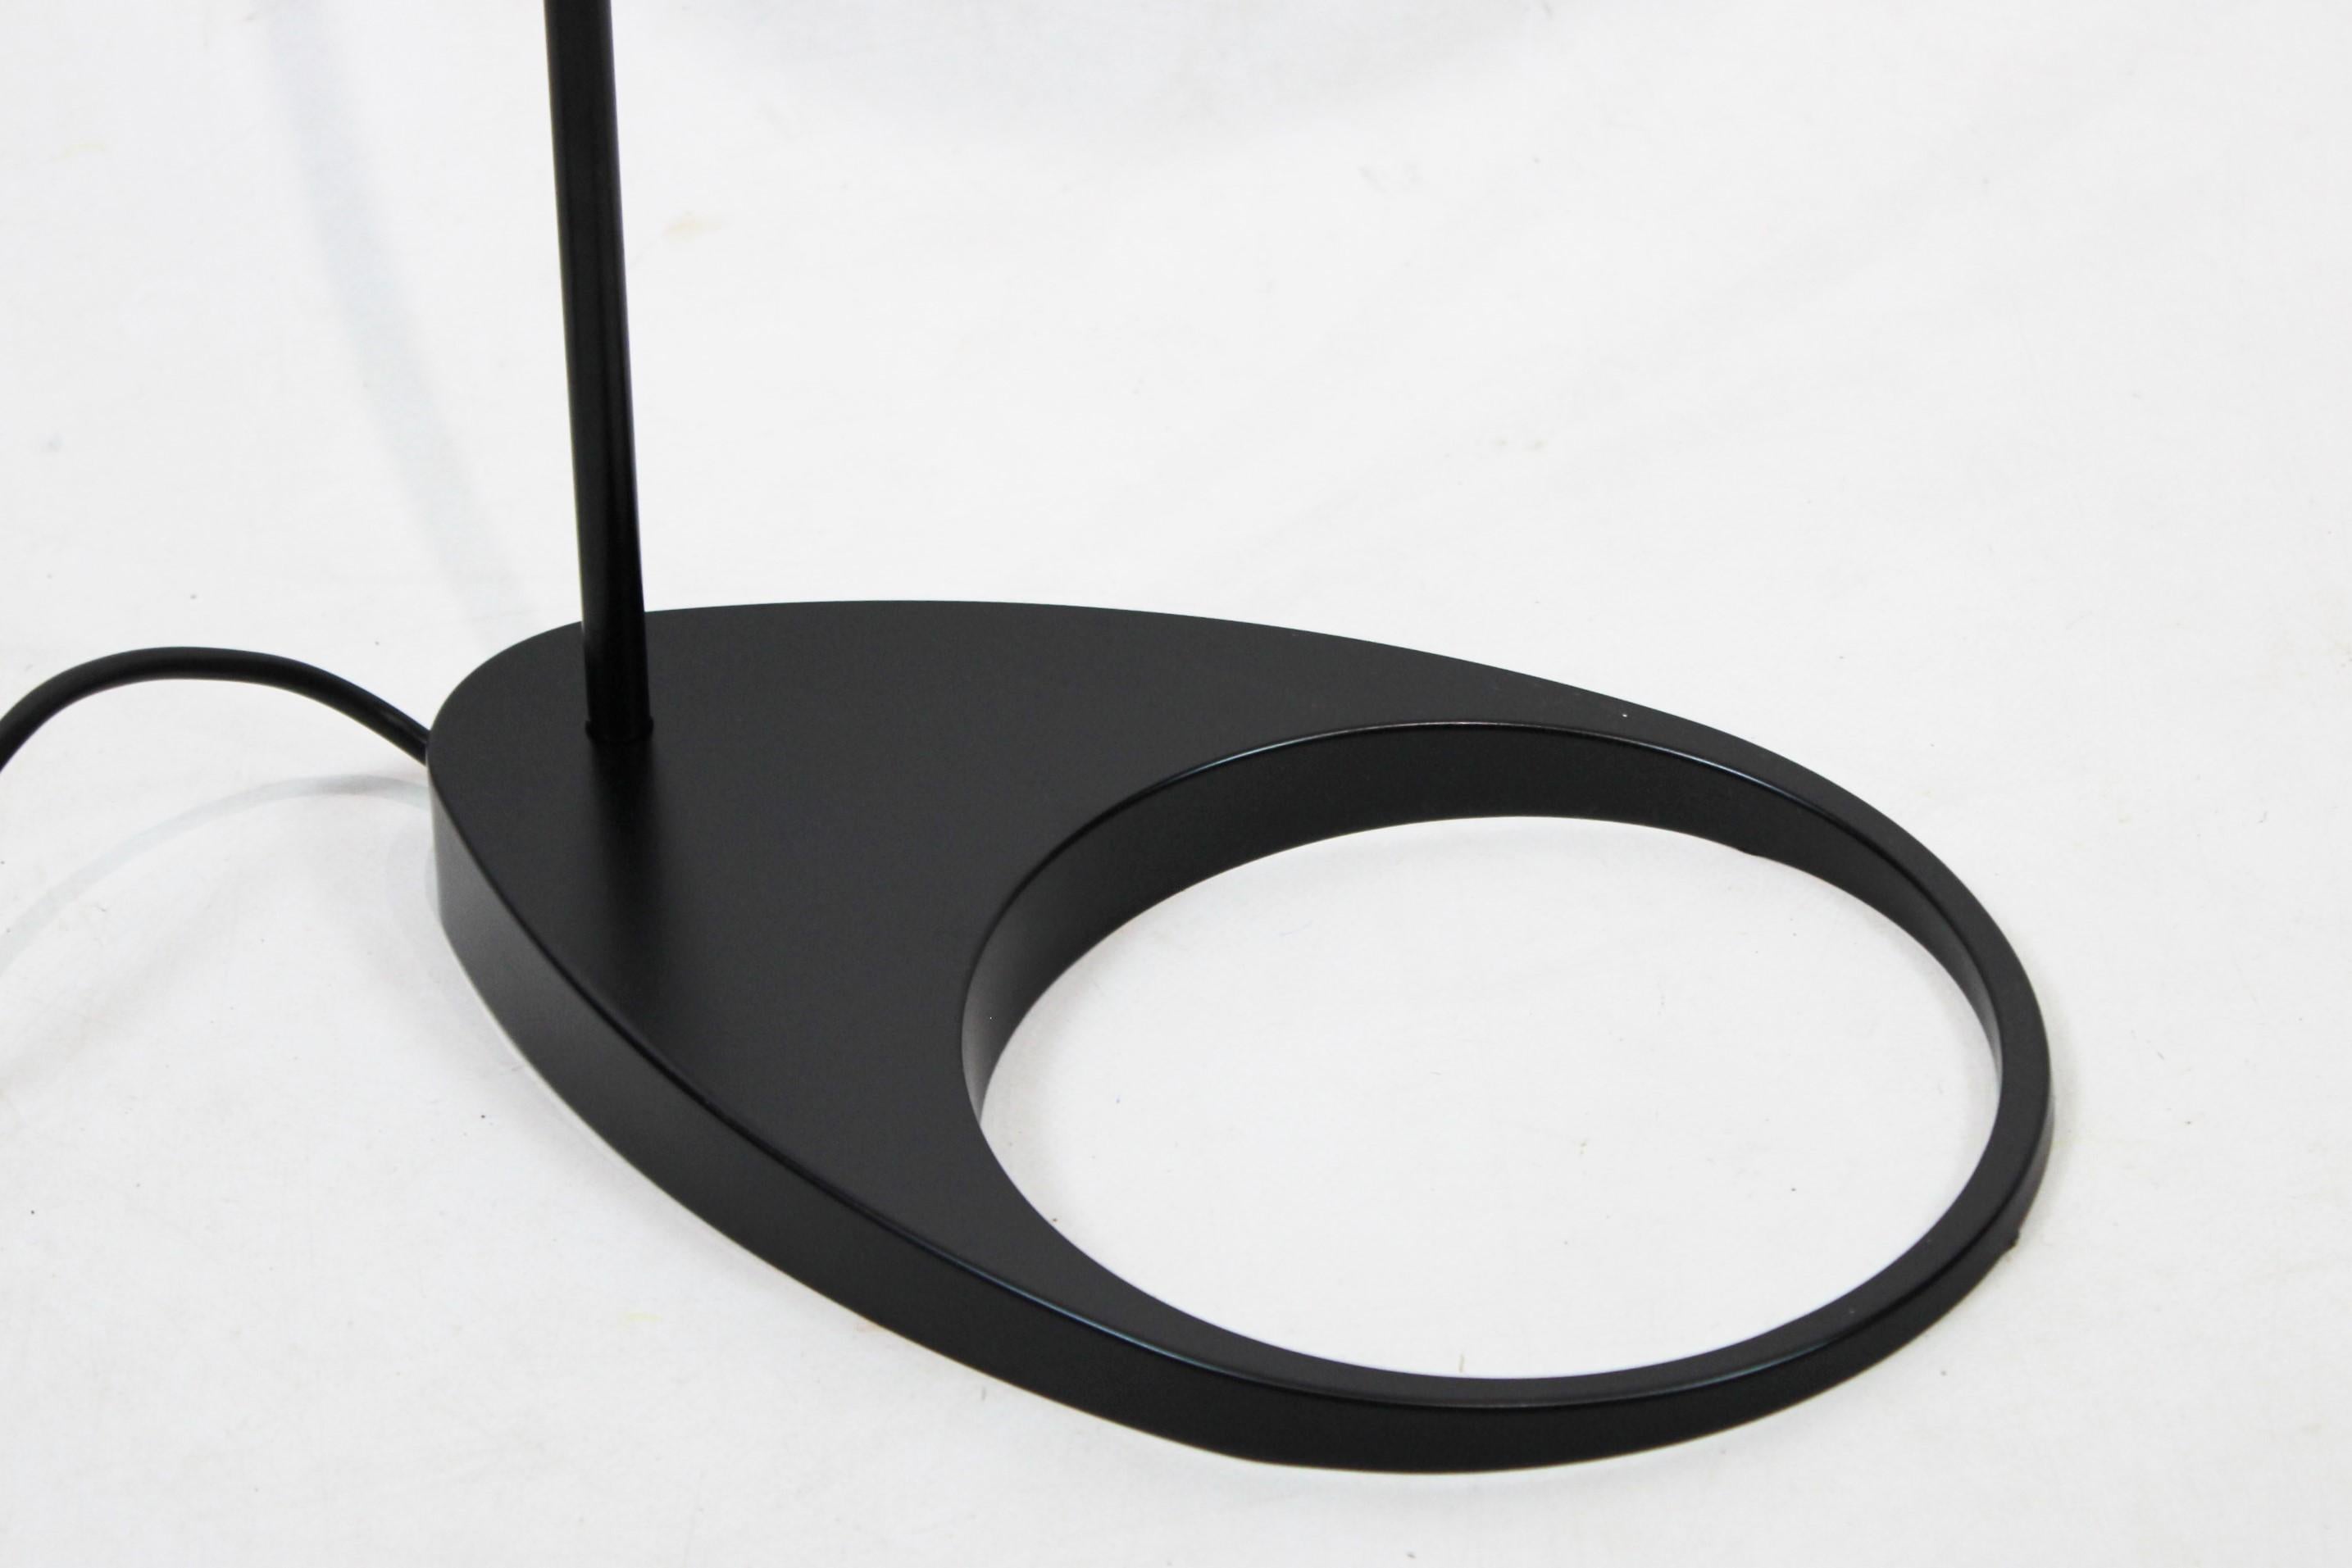 Black Floor Lamp by Arne Jacobsen and Louis Poulsen In Good Condition For Sale In Lejre, DK